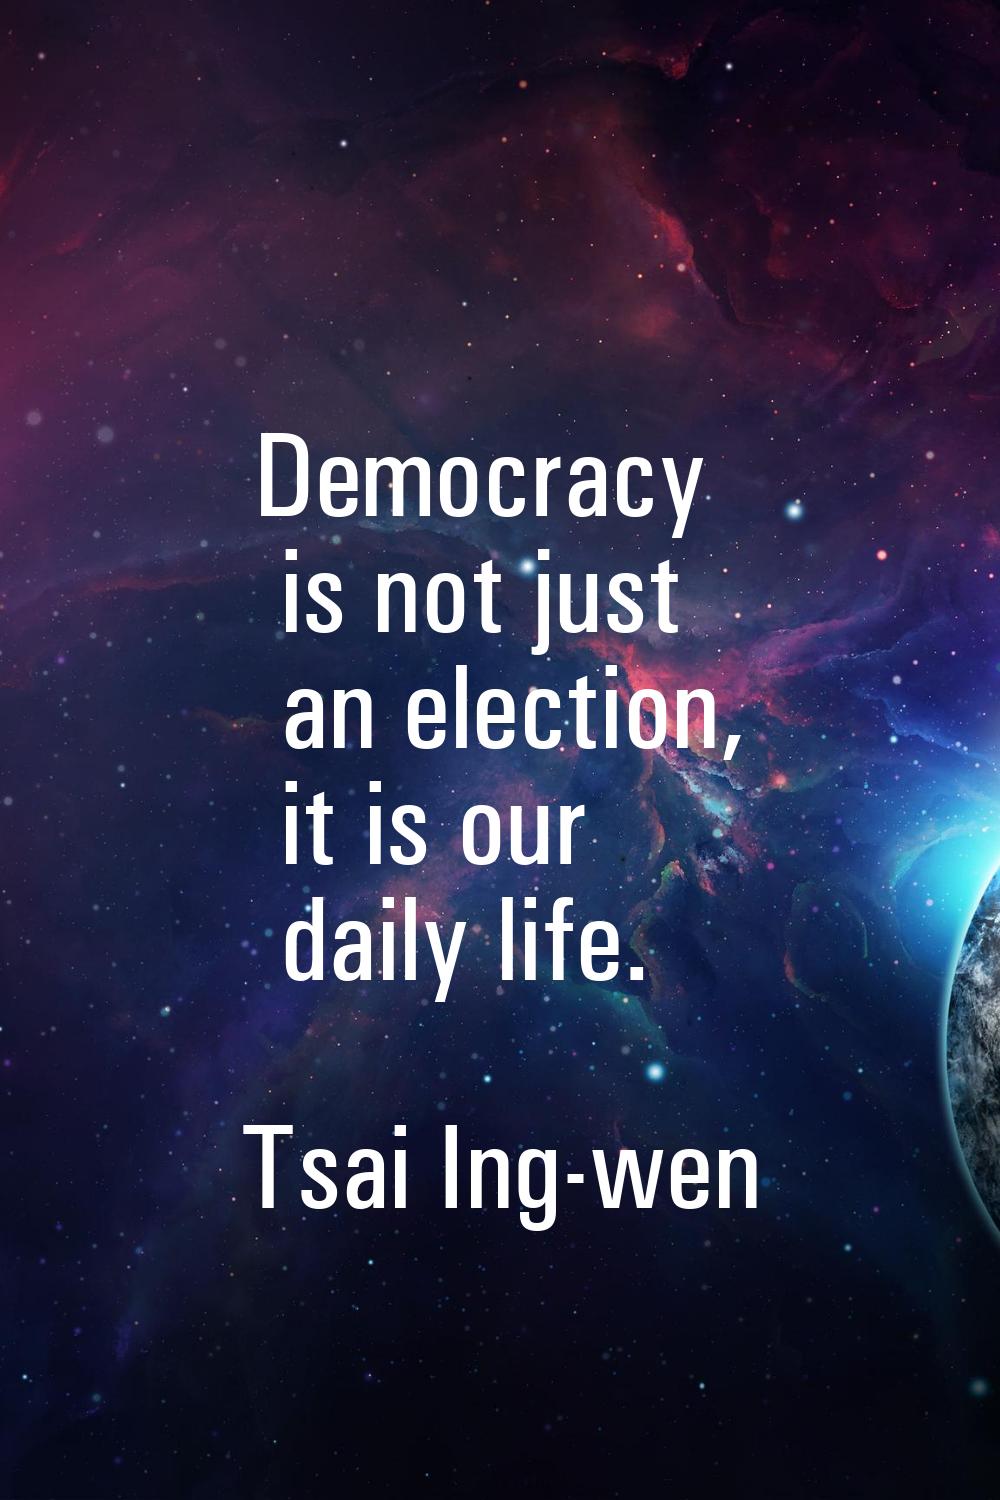 Democracy is not just an election, it is our daily life.